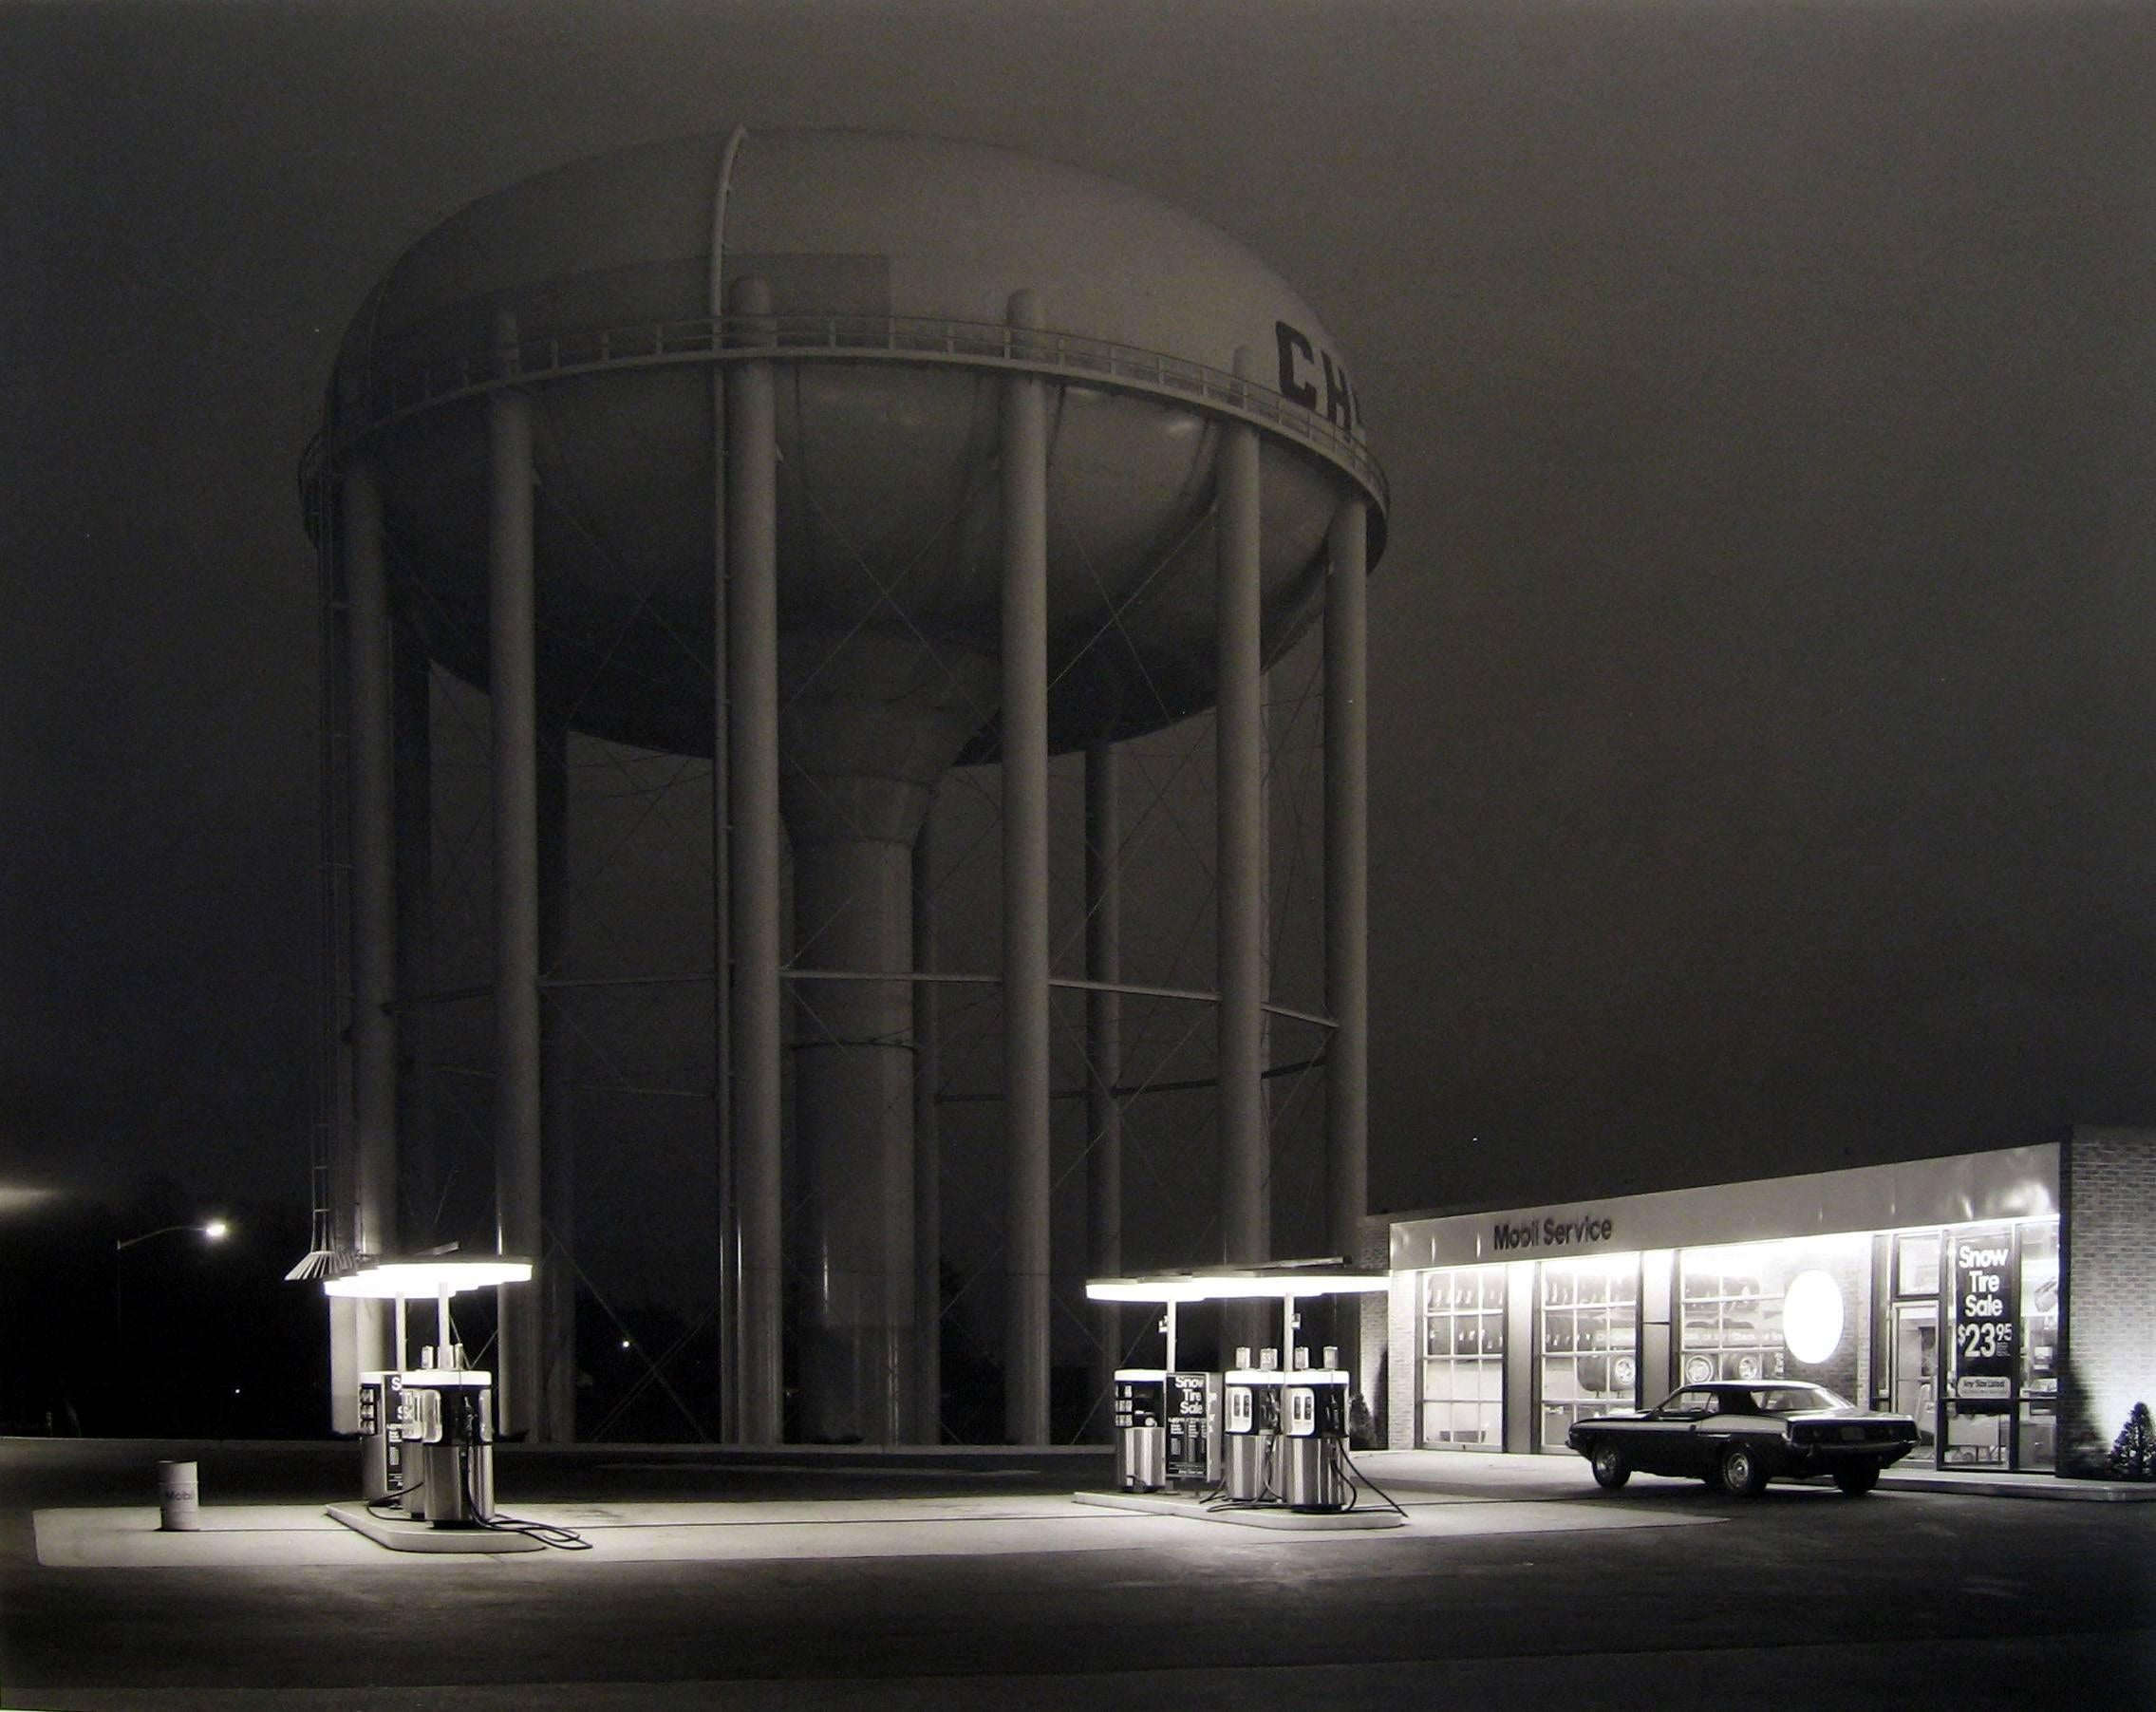 Petit's Mobil Station, Cherry Hill, New Jersey - Photograph by George Tice